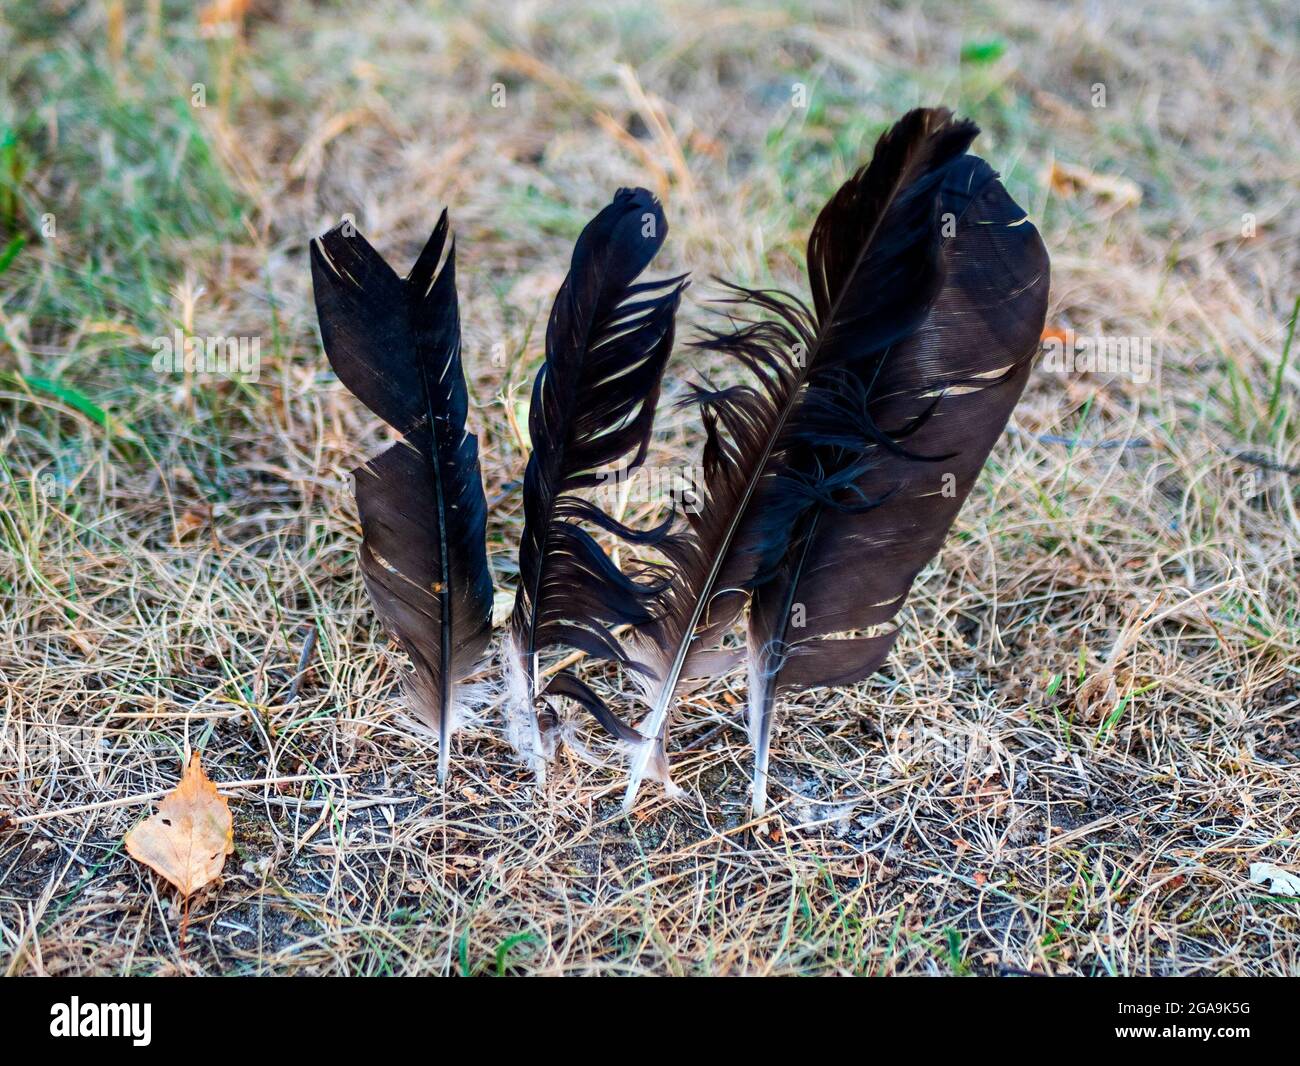 Four black bird feathers forced into the ground. Concept of ominous sign, spirituality or witchery Stock Photo